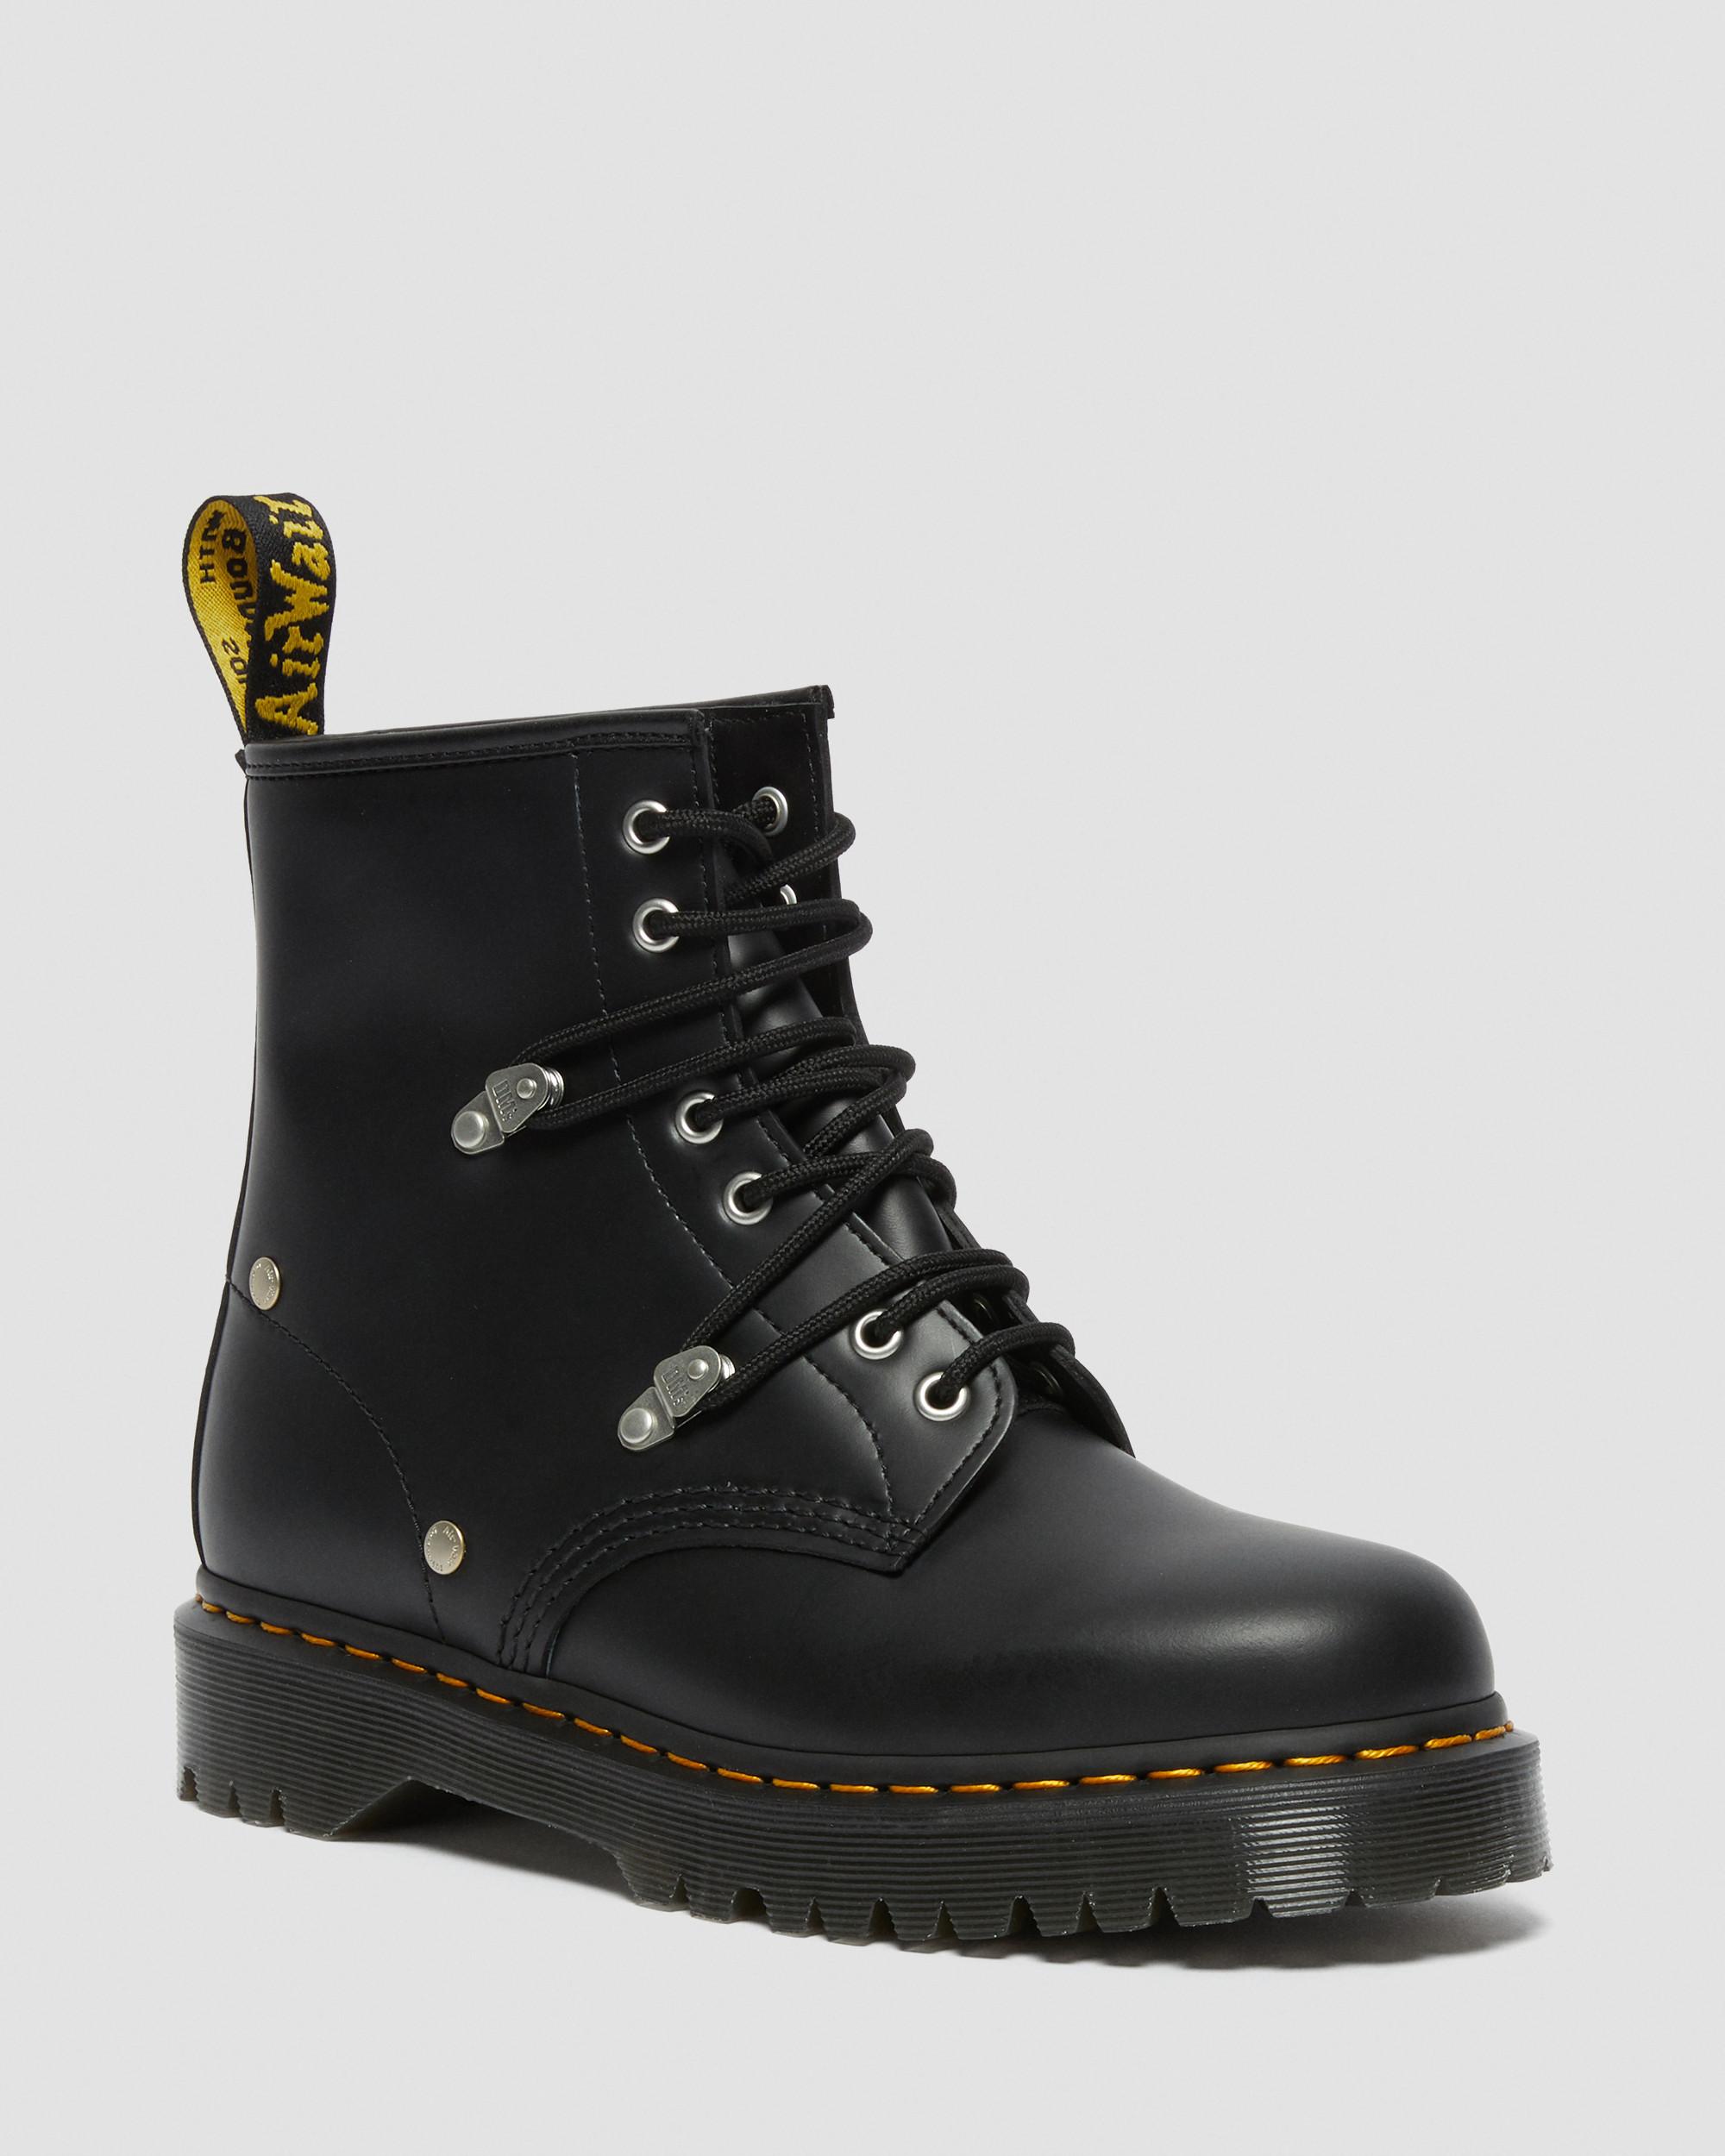 1460 Bex Stud Leather Lace Up Boots Martens